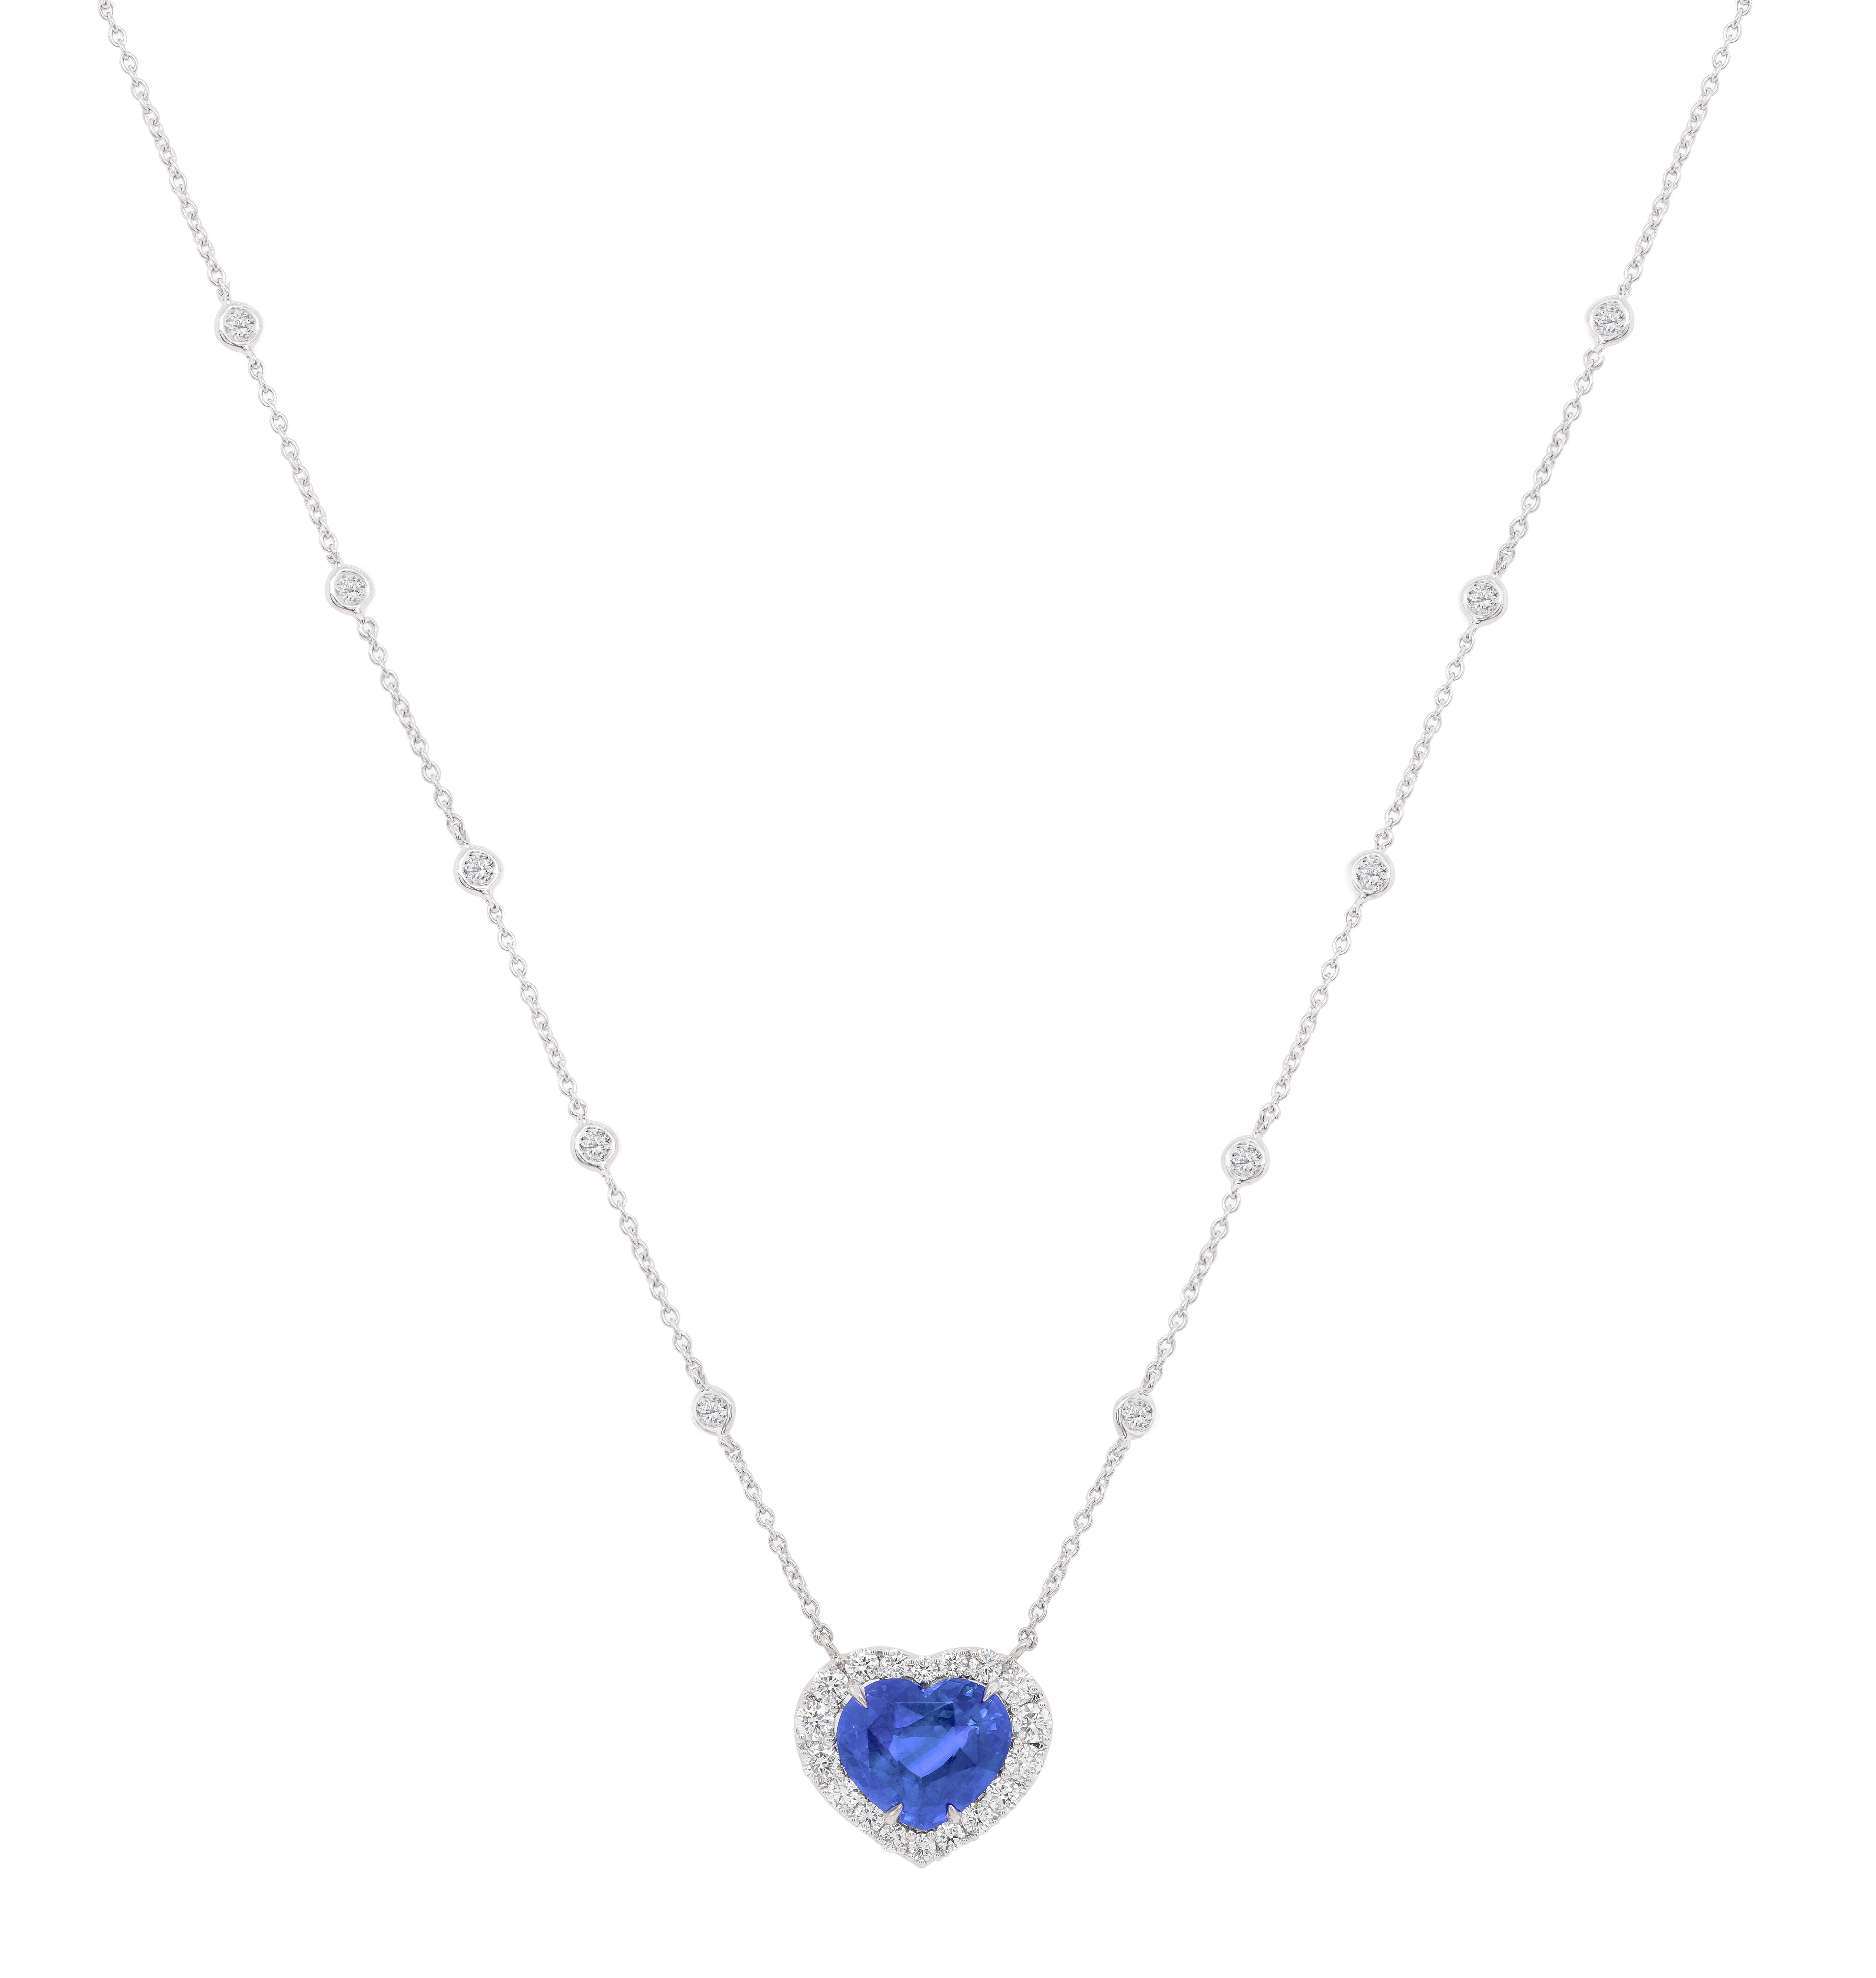 18KT White gold Certified Heart shape sapphire and diamond pendant features 6.57 Carat Sapphire surrounded by 2.00 Carats of Round Brilliant cut white diamonds. 16